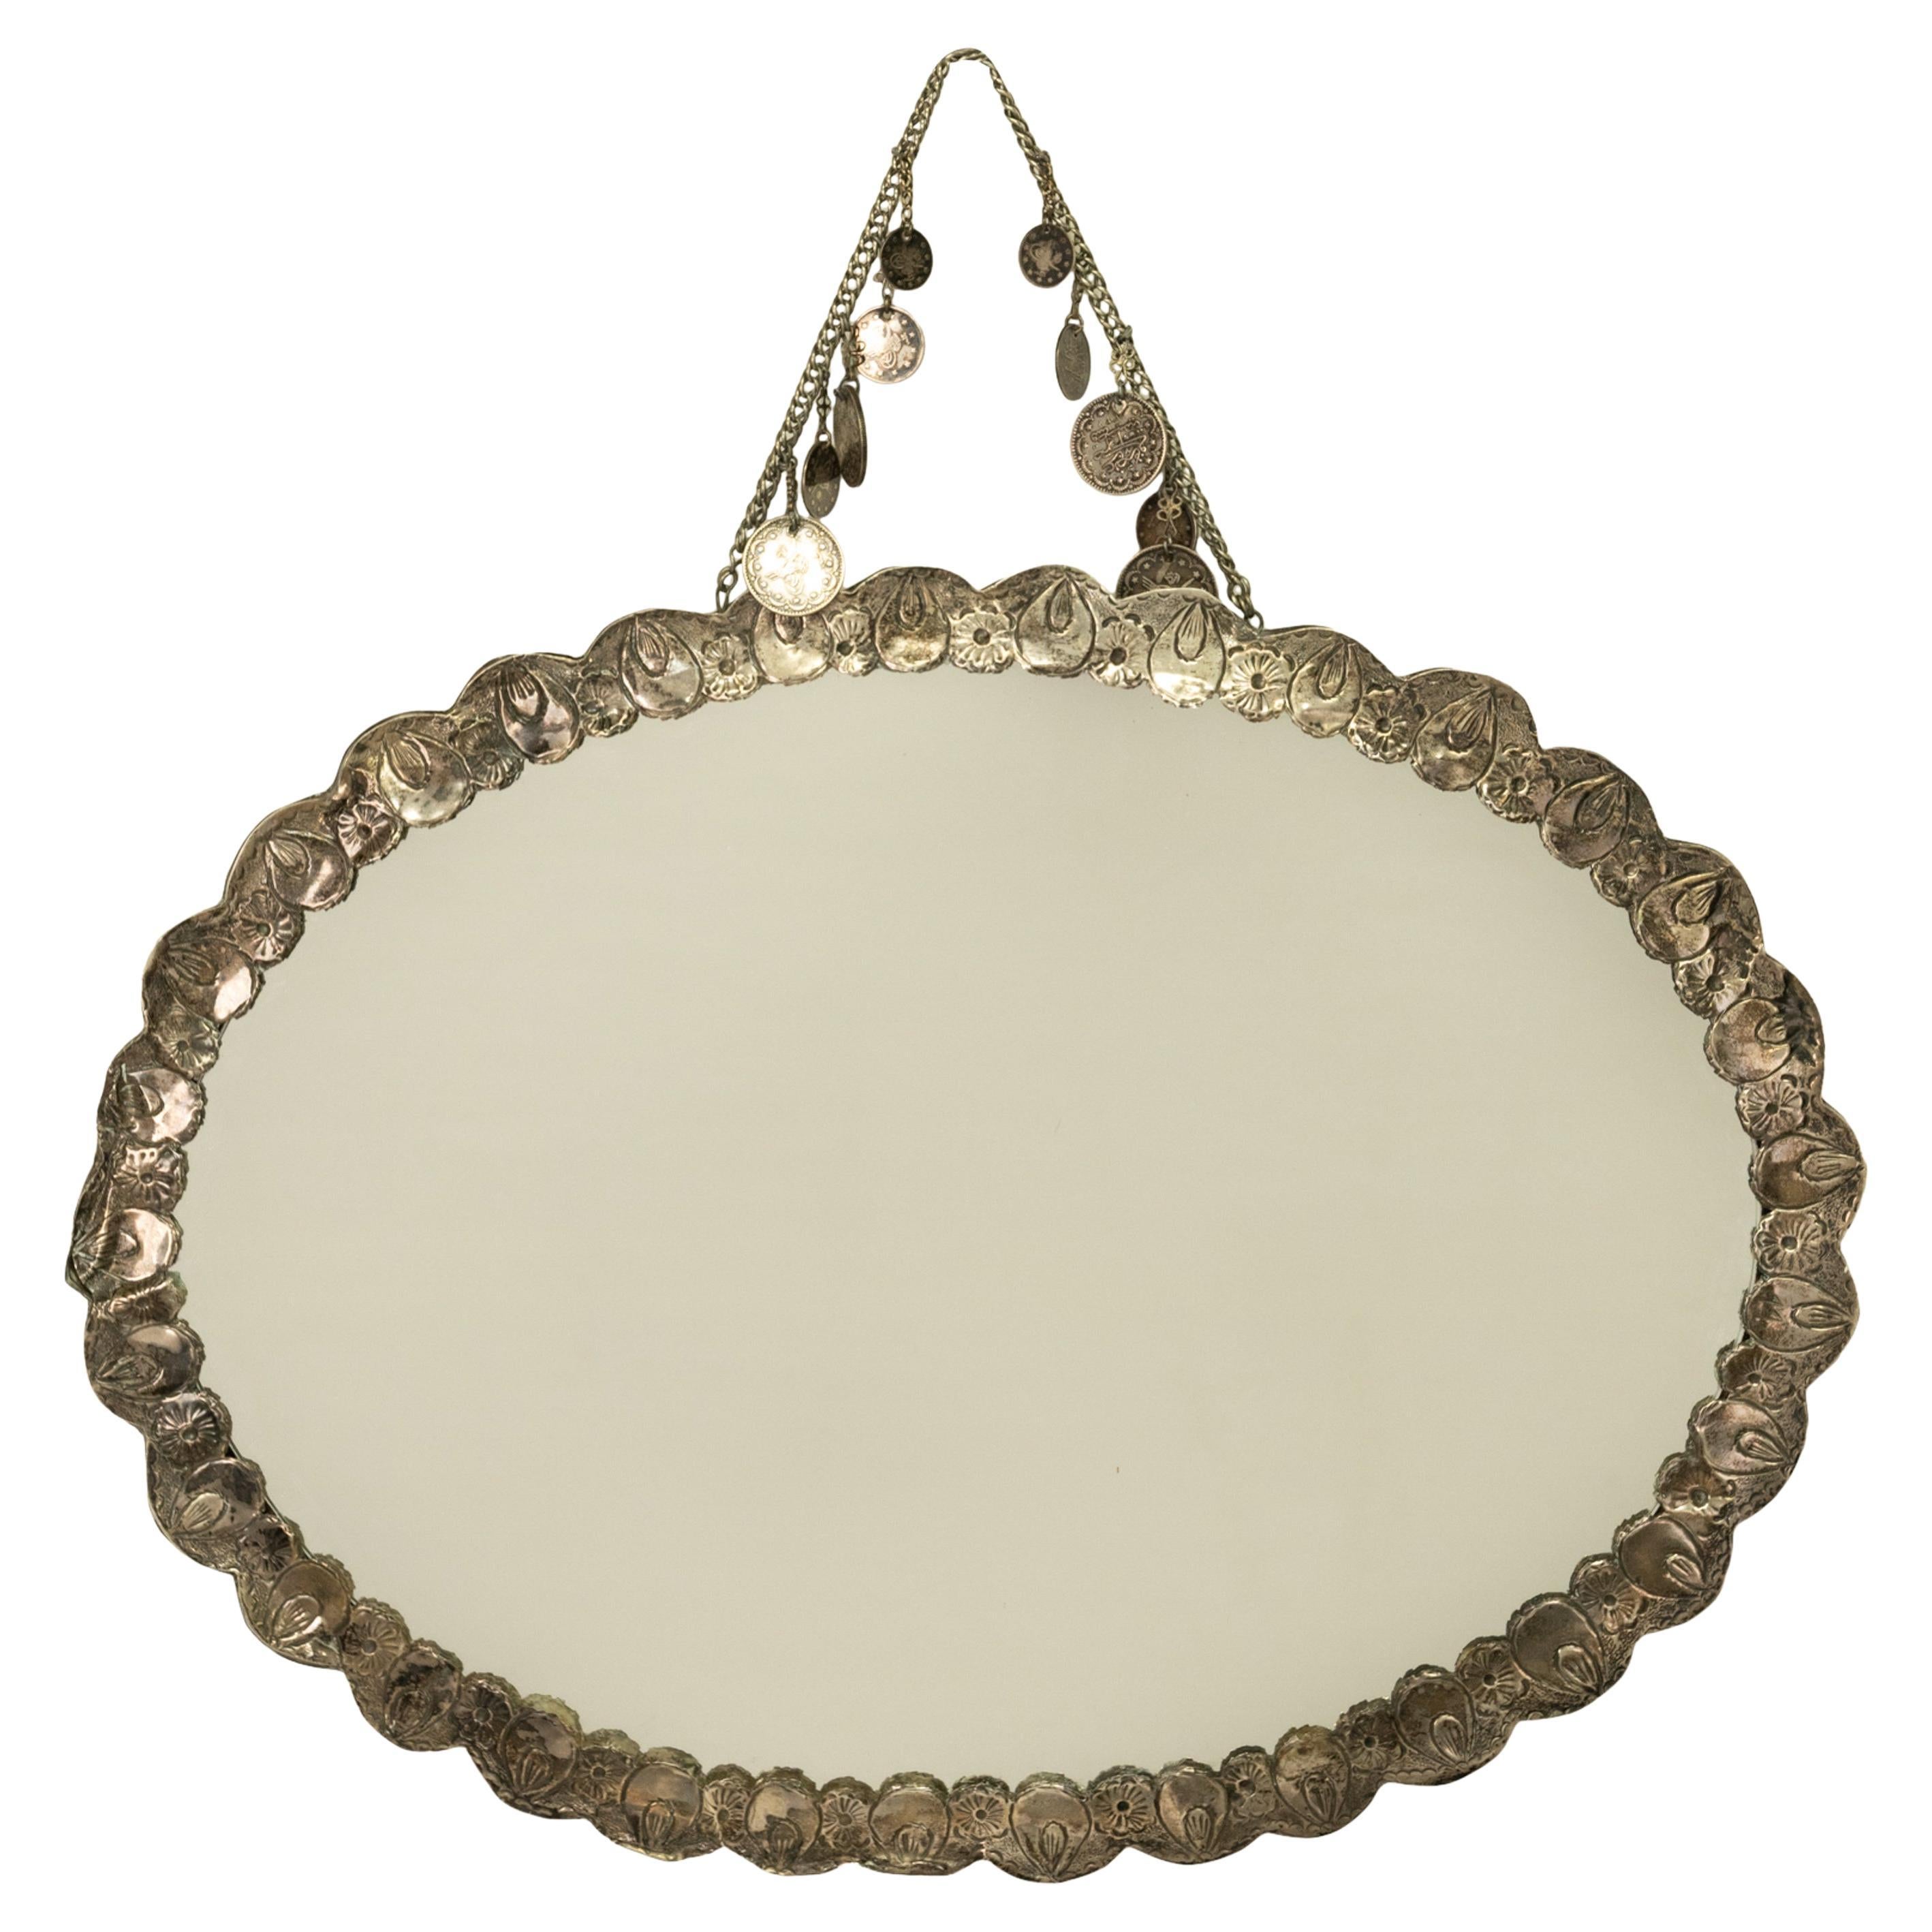 A good & large antique 19th century Ottoman silver wedding/wall mirror, with ten Ottoman Turkish Lira coins in three denominations & each dated with the Hijri date of 1327, which equates to the year 1909 in the Western calendar .

The mirror is of 